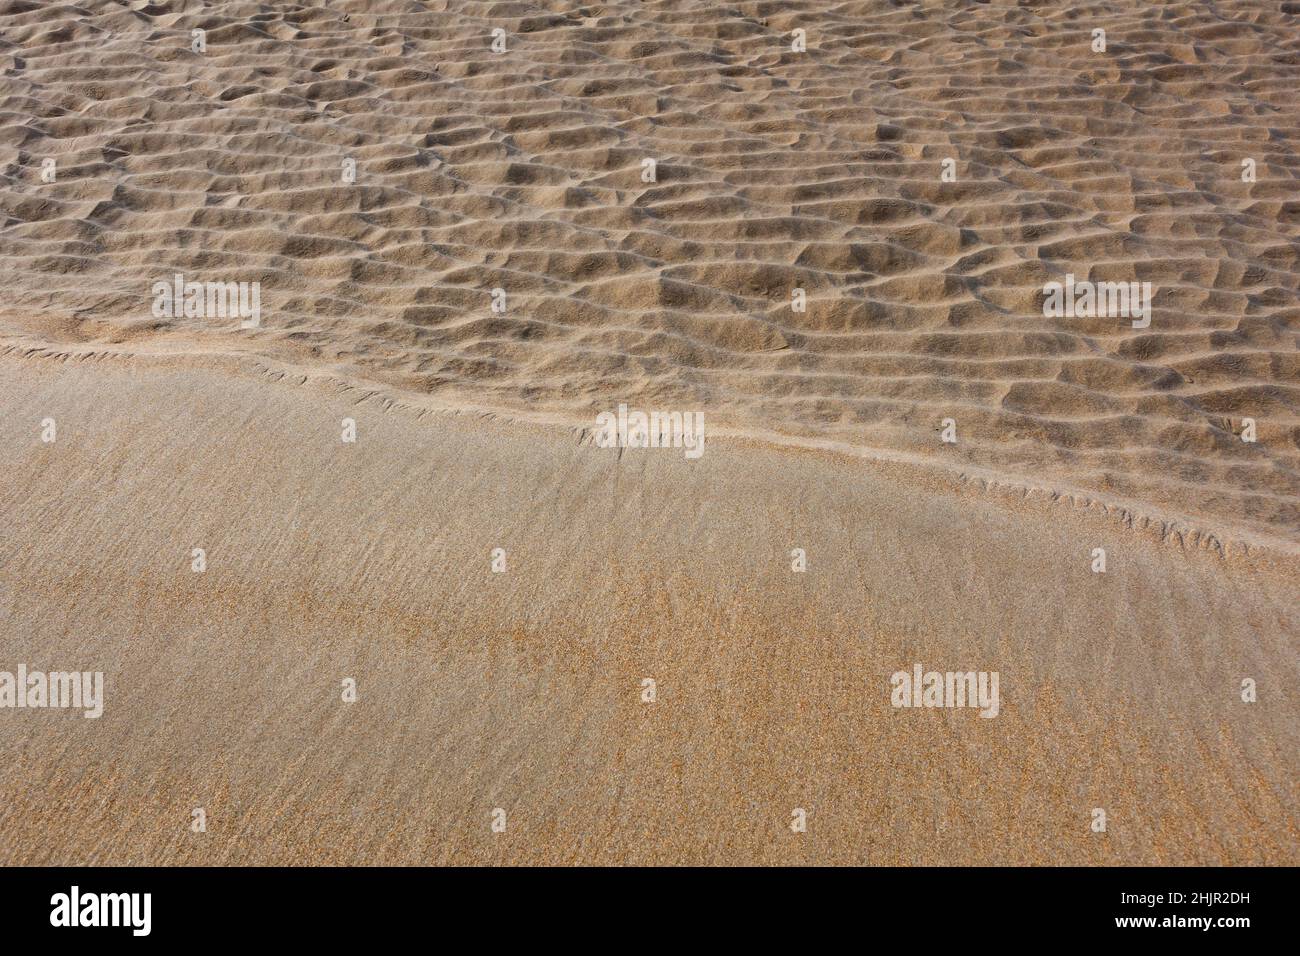 Wet sand meets dry sand on beach abstract Stock Photo